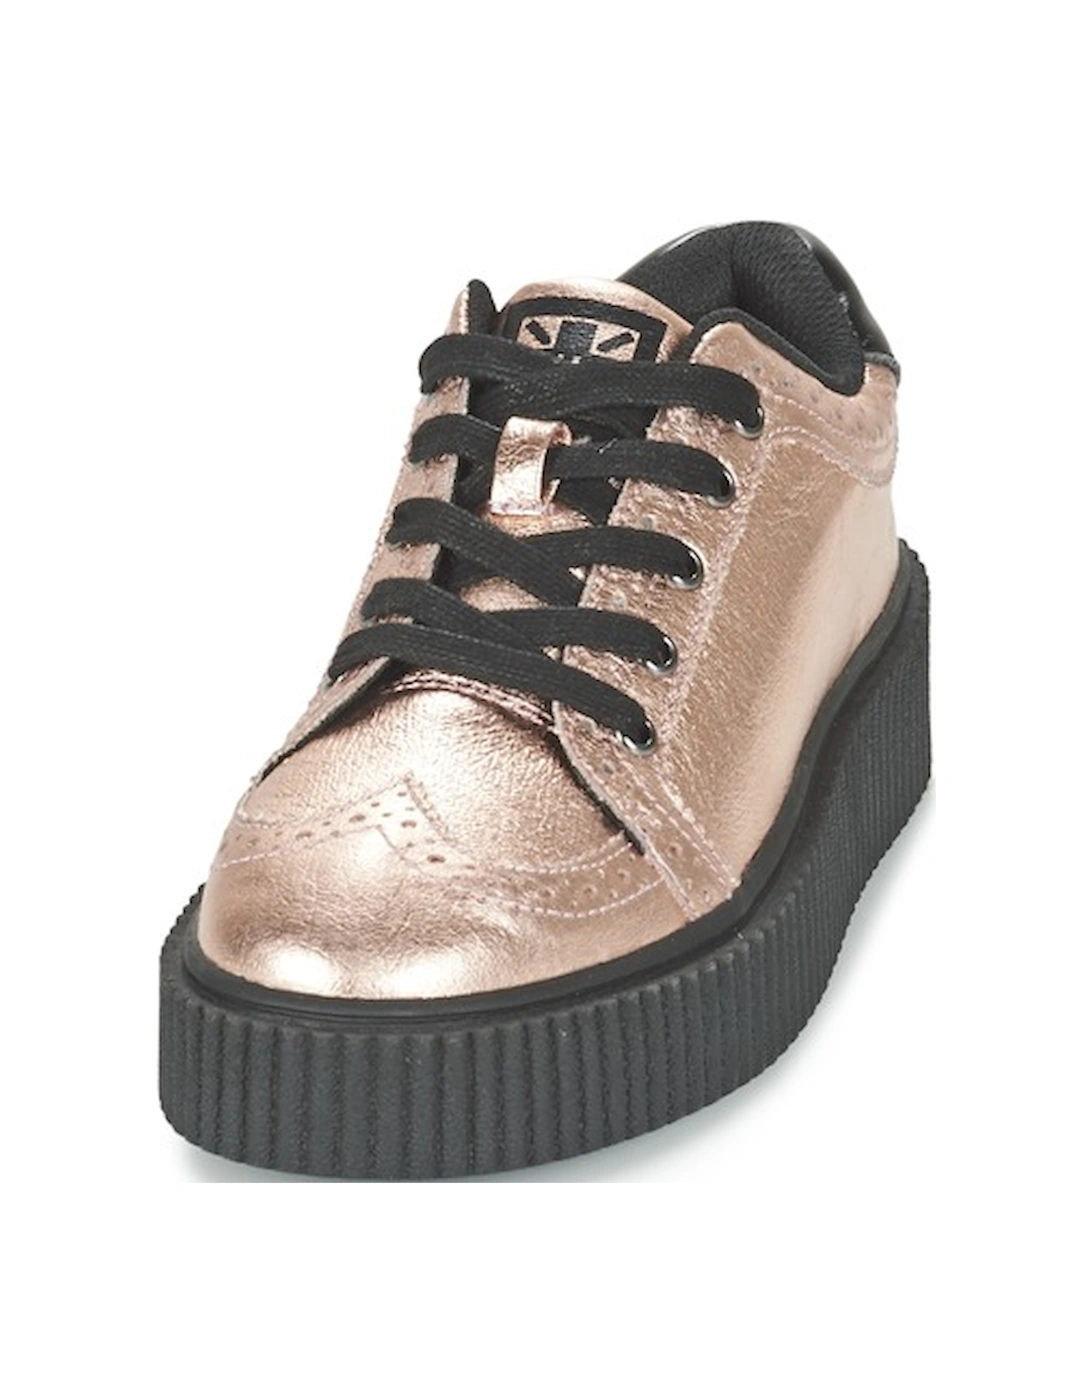 CASBAH CREEPERS